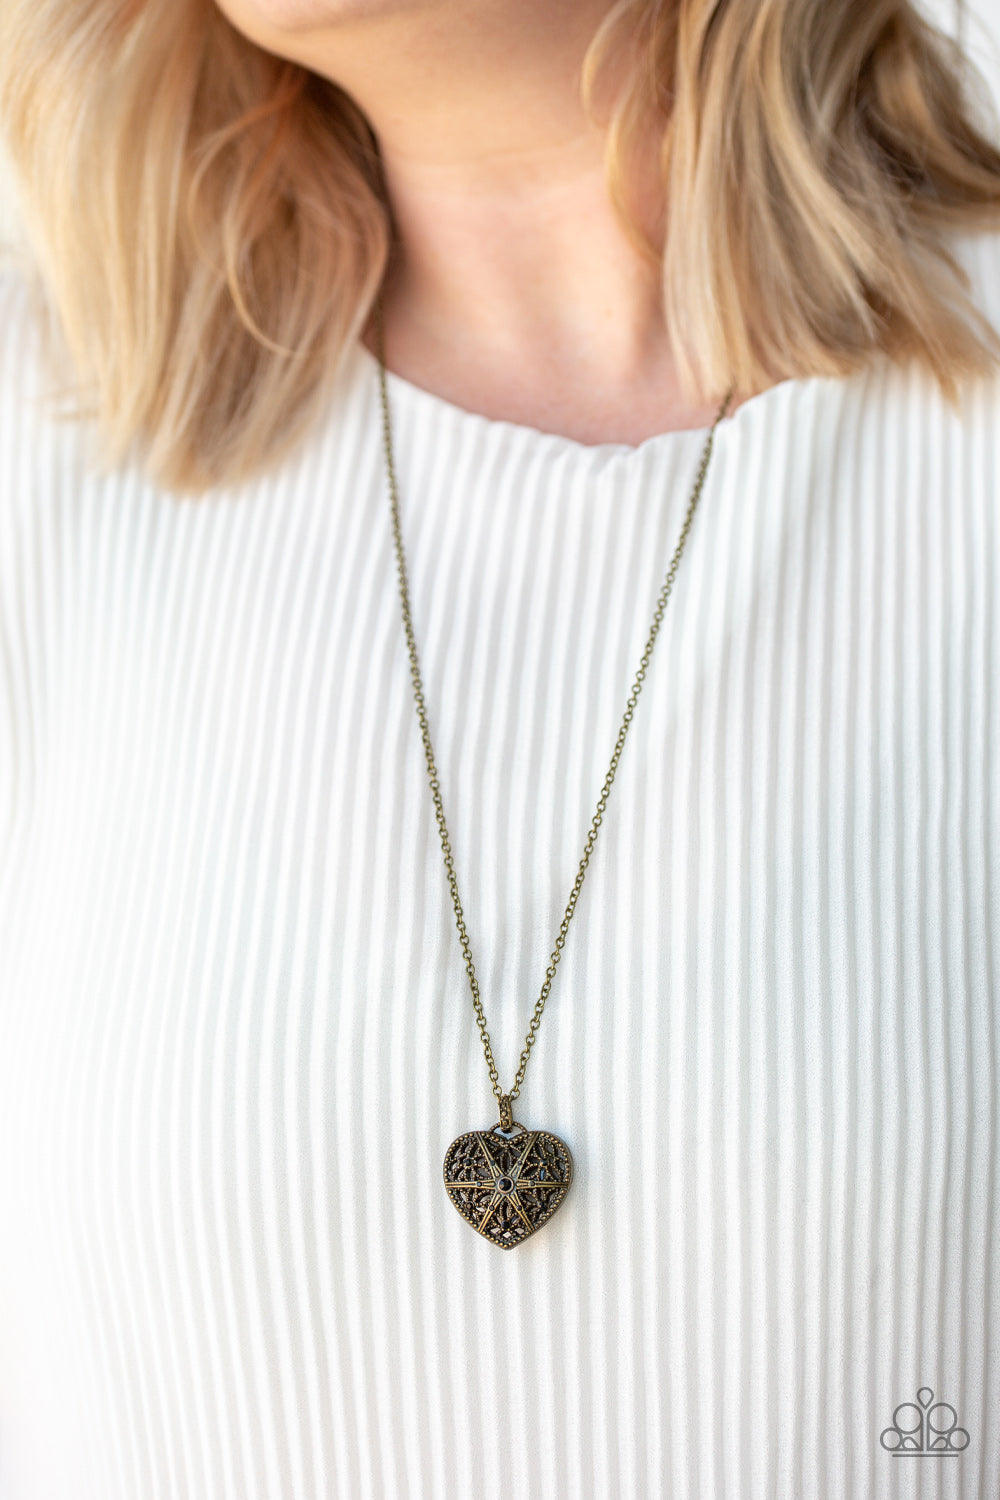 Heart Full of Love Brass Necklace | Paparazzi Accessories | $5.00